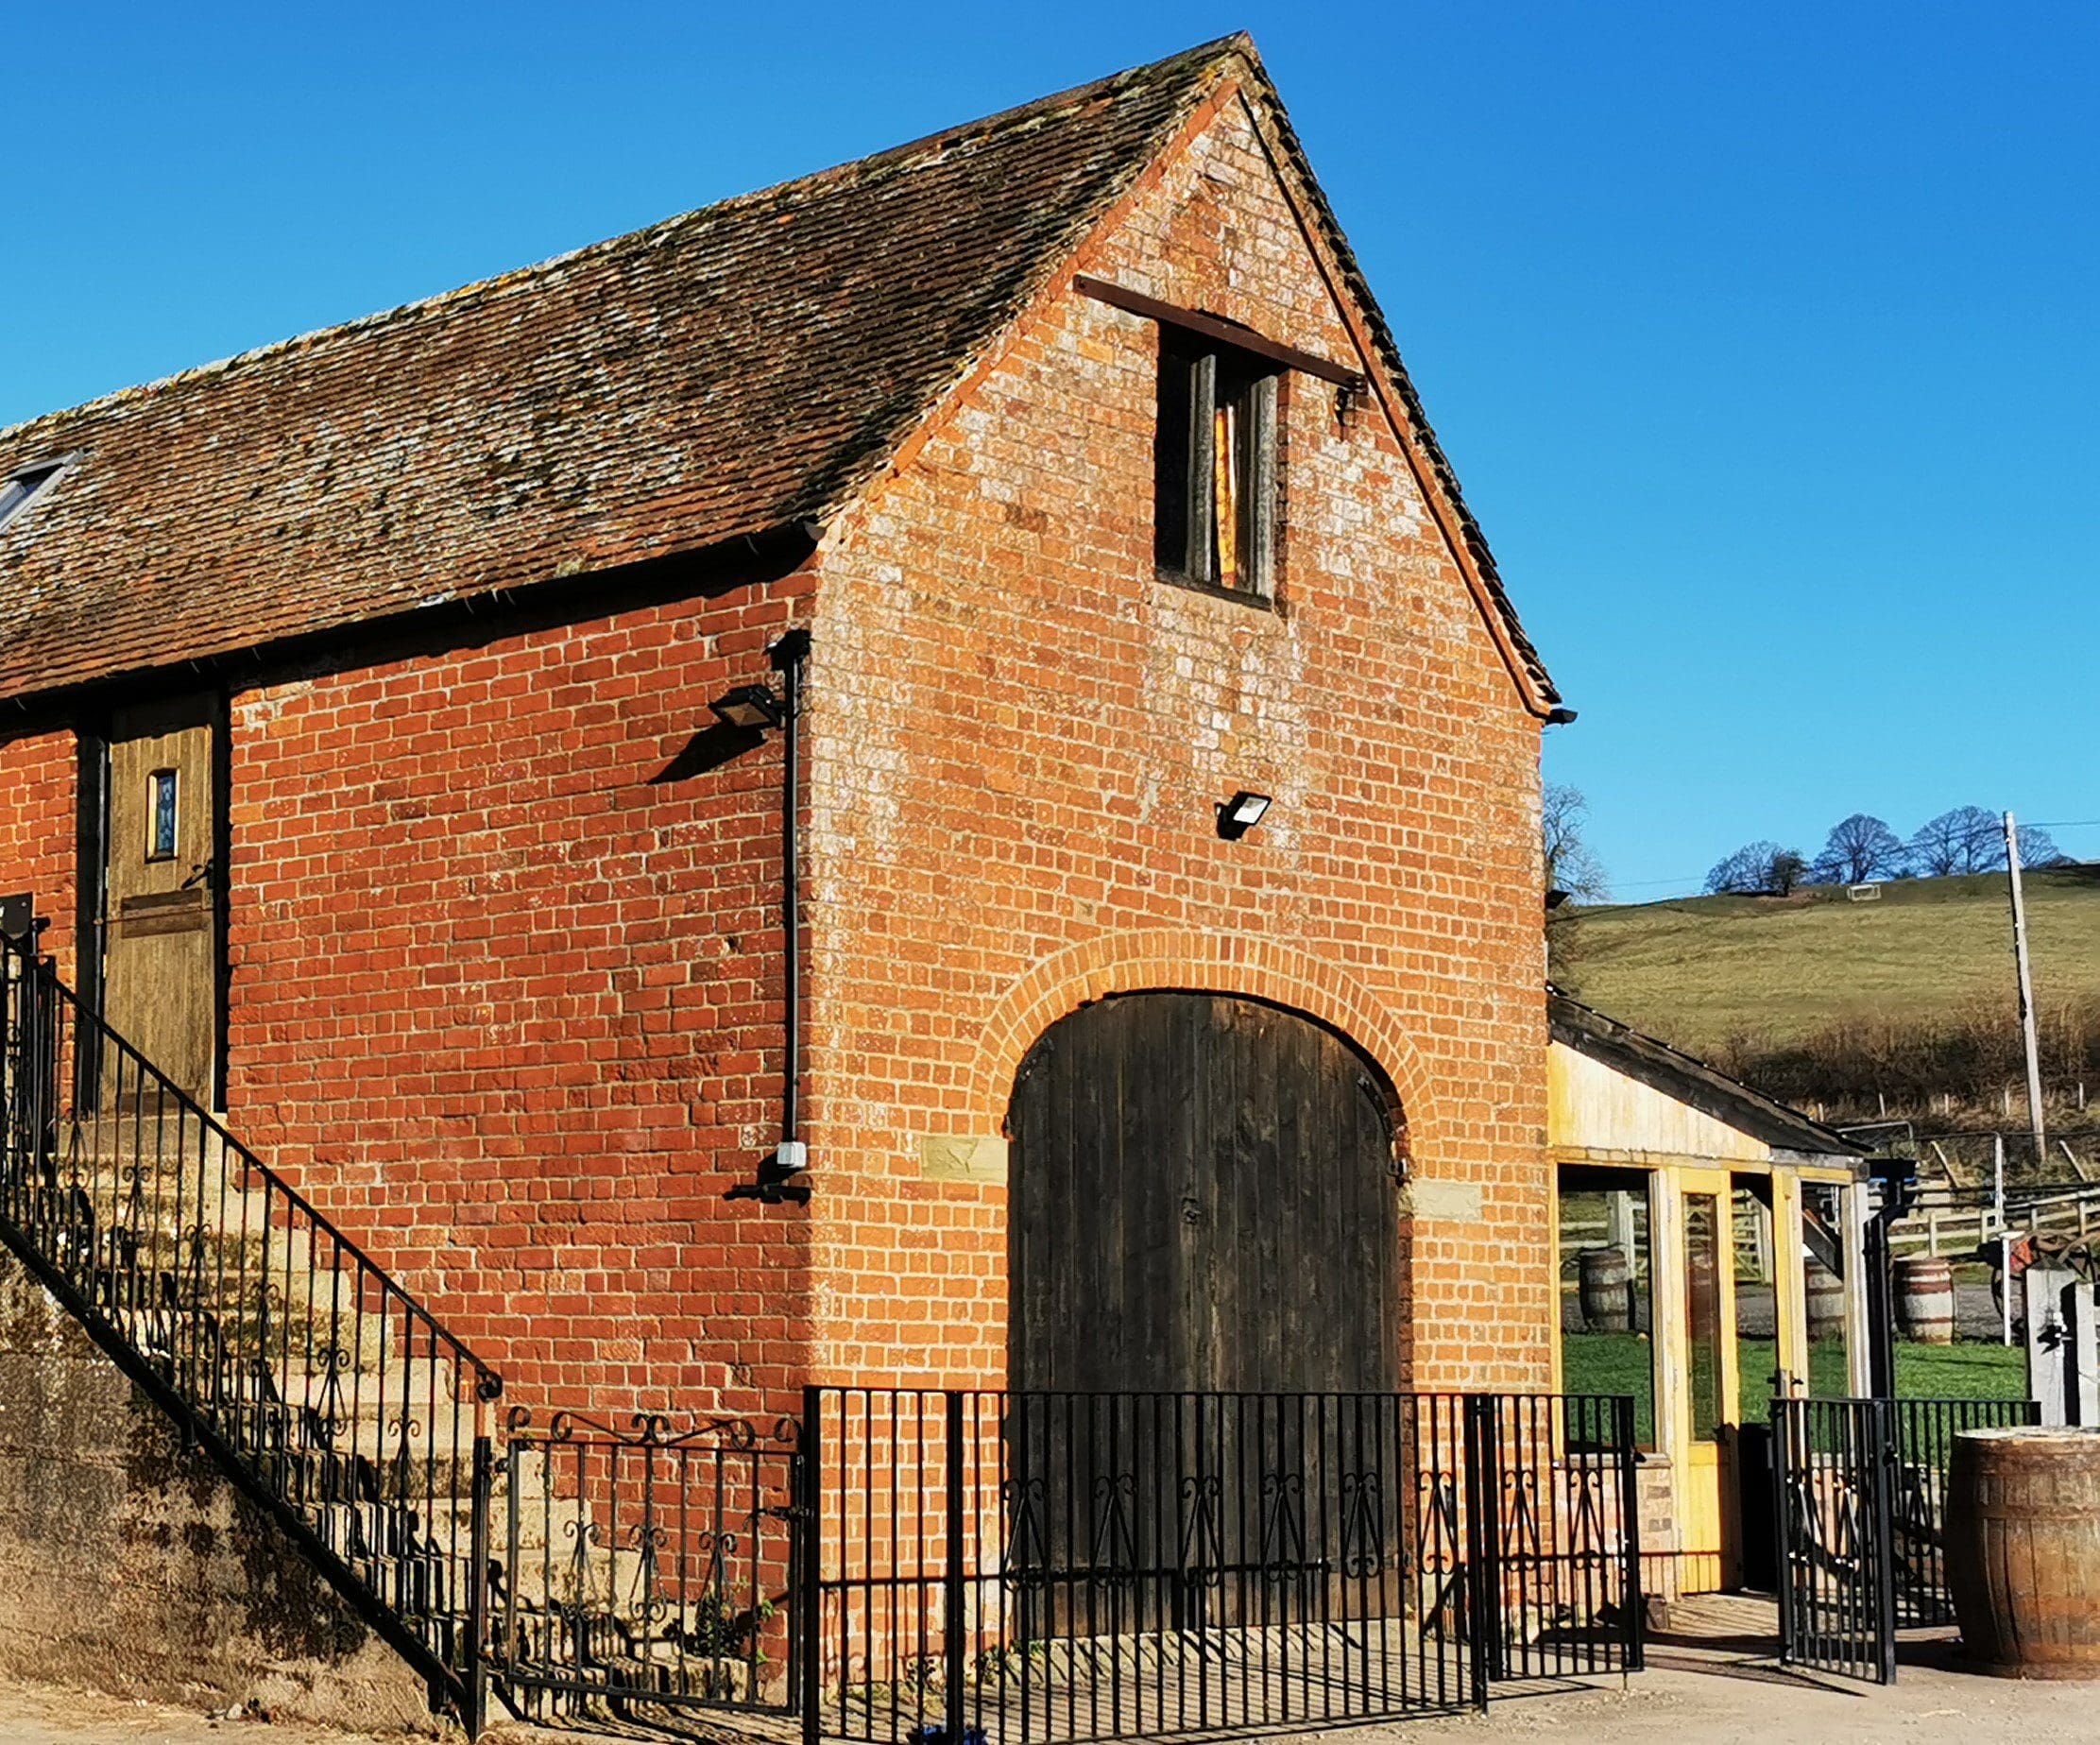 The Granary at Gwatkin Red Cow